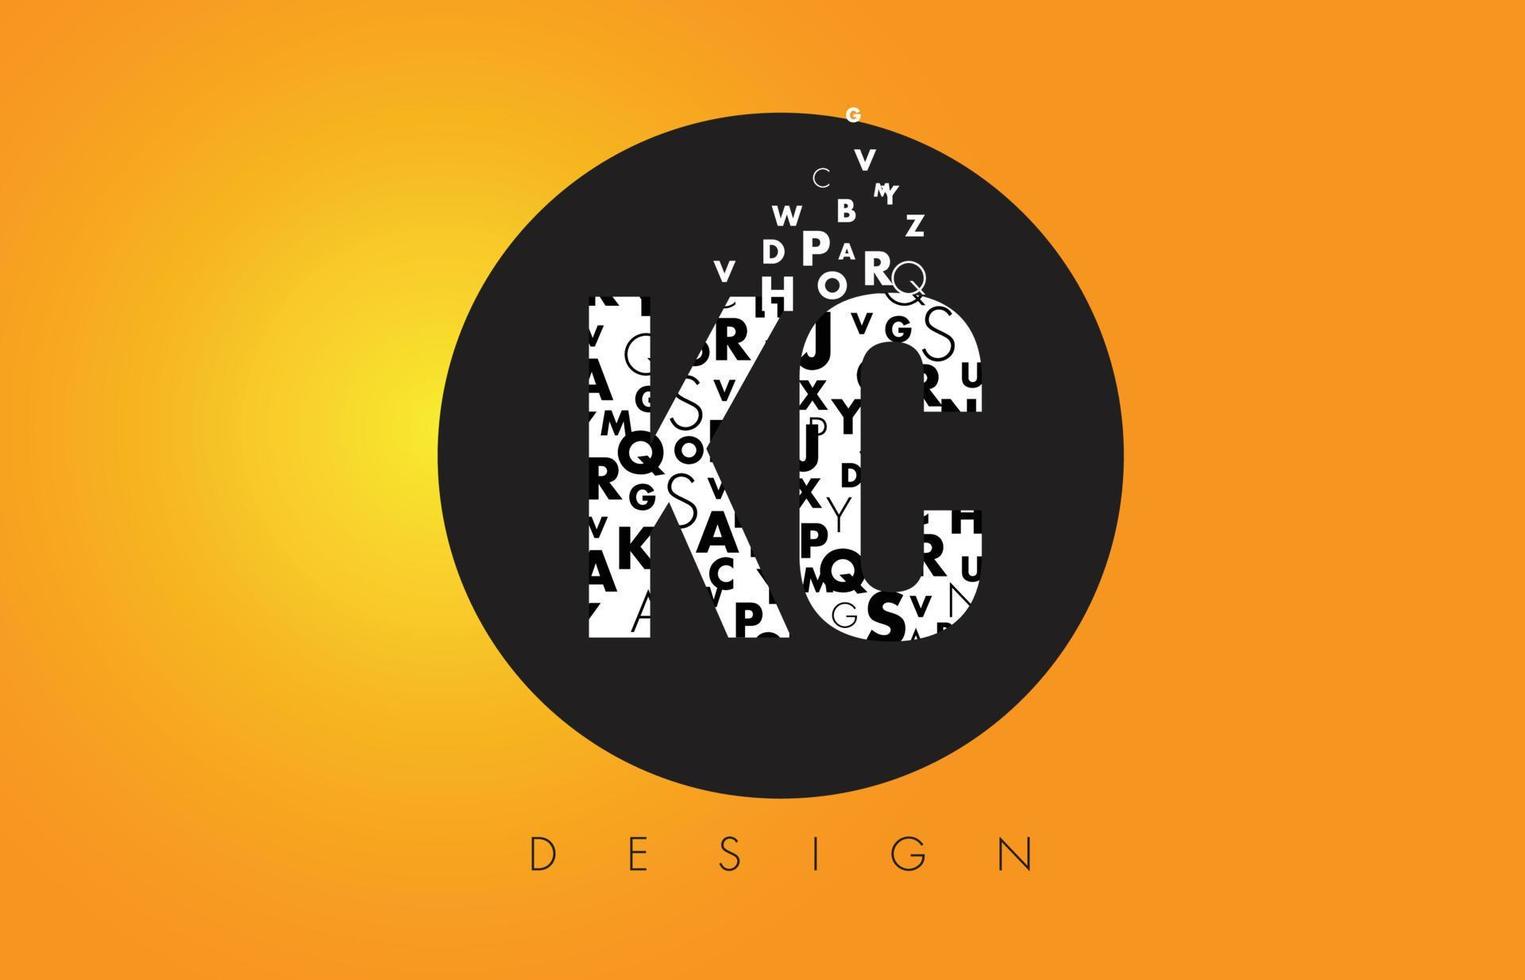 KC K C Logo Made of Small Letters with Black Circle and Yellow Background. vector